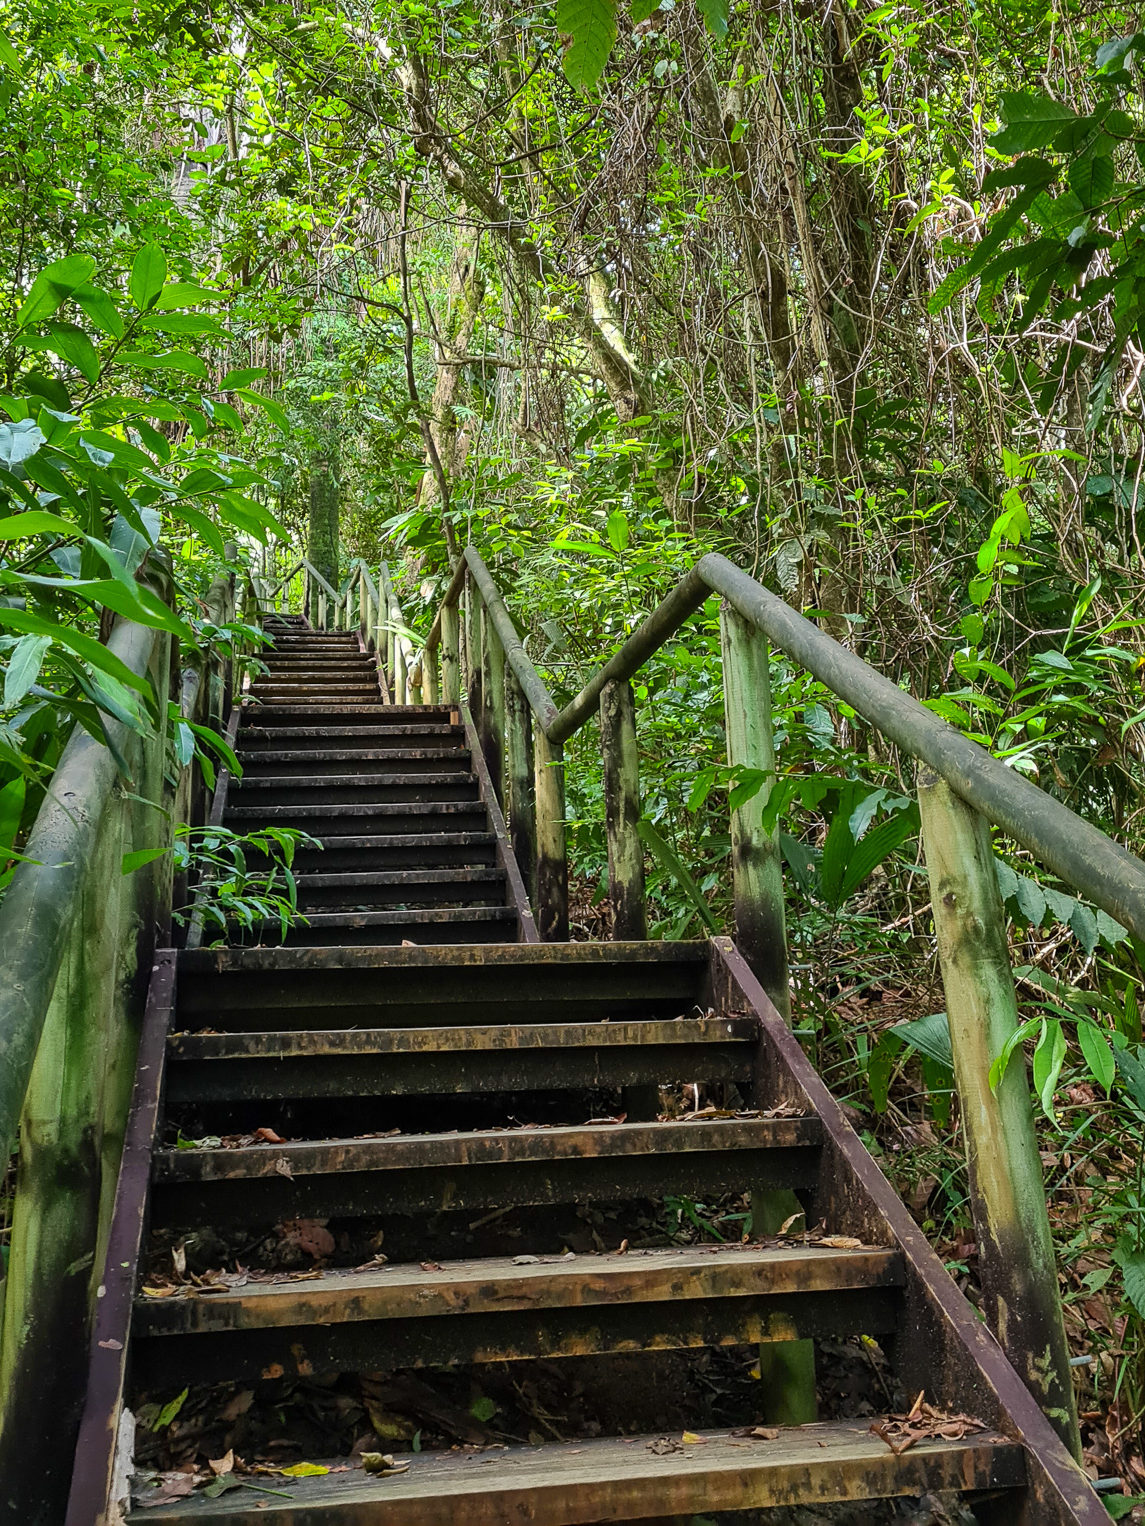 A set of stairs mark of the many paths through Manuel Antonio National Park.